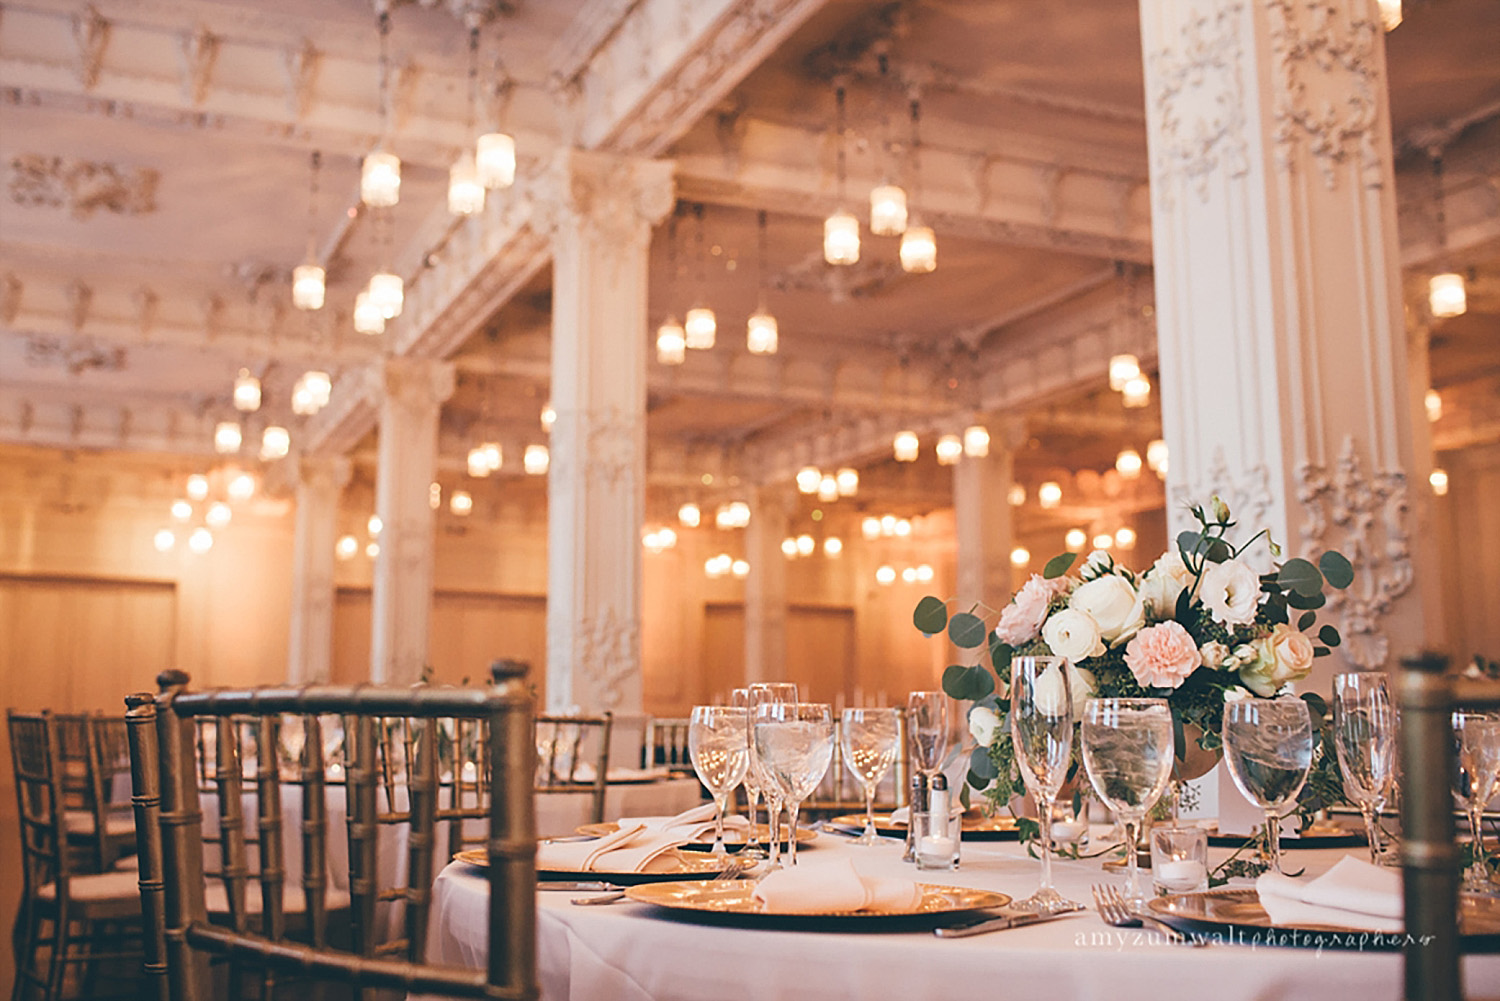 Dallas Scottish Rite Library and Museum wedding Crystal Ballroom white and blush flowers